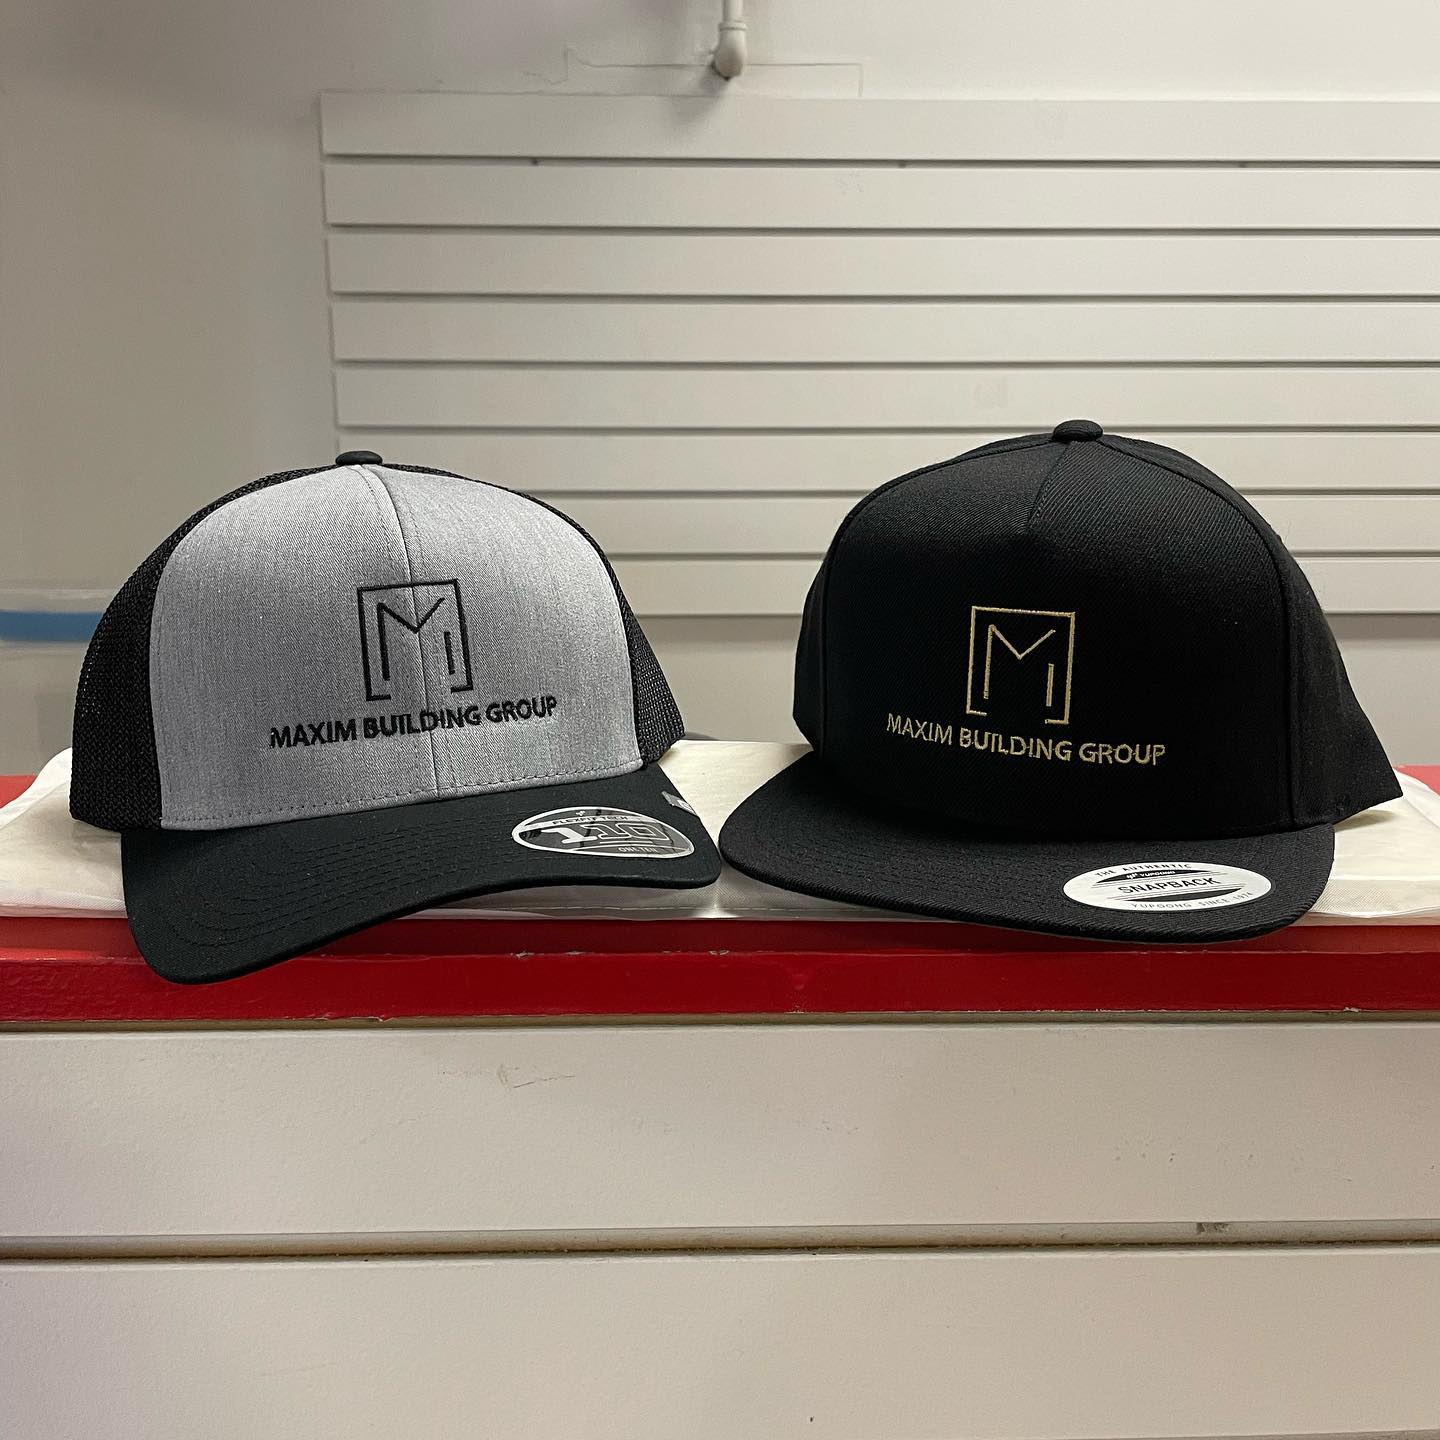 More lids!! Check out this sweet design from @maximbuildinggroup on these TravisMathew hats!!